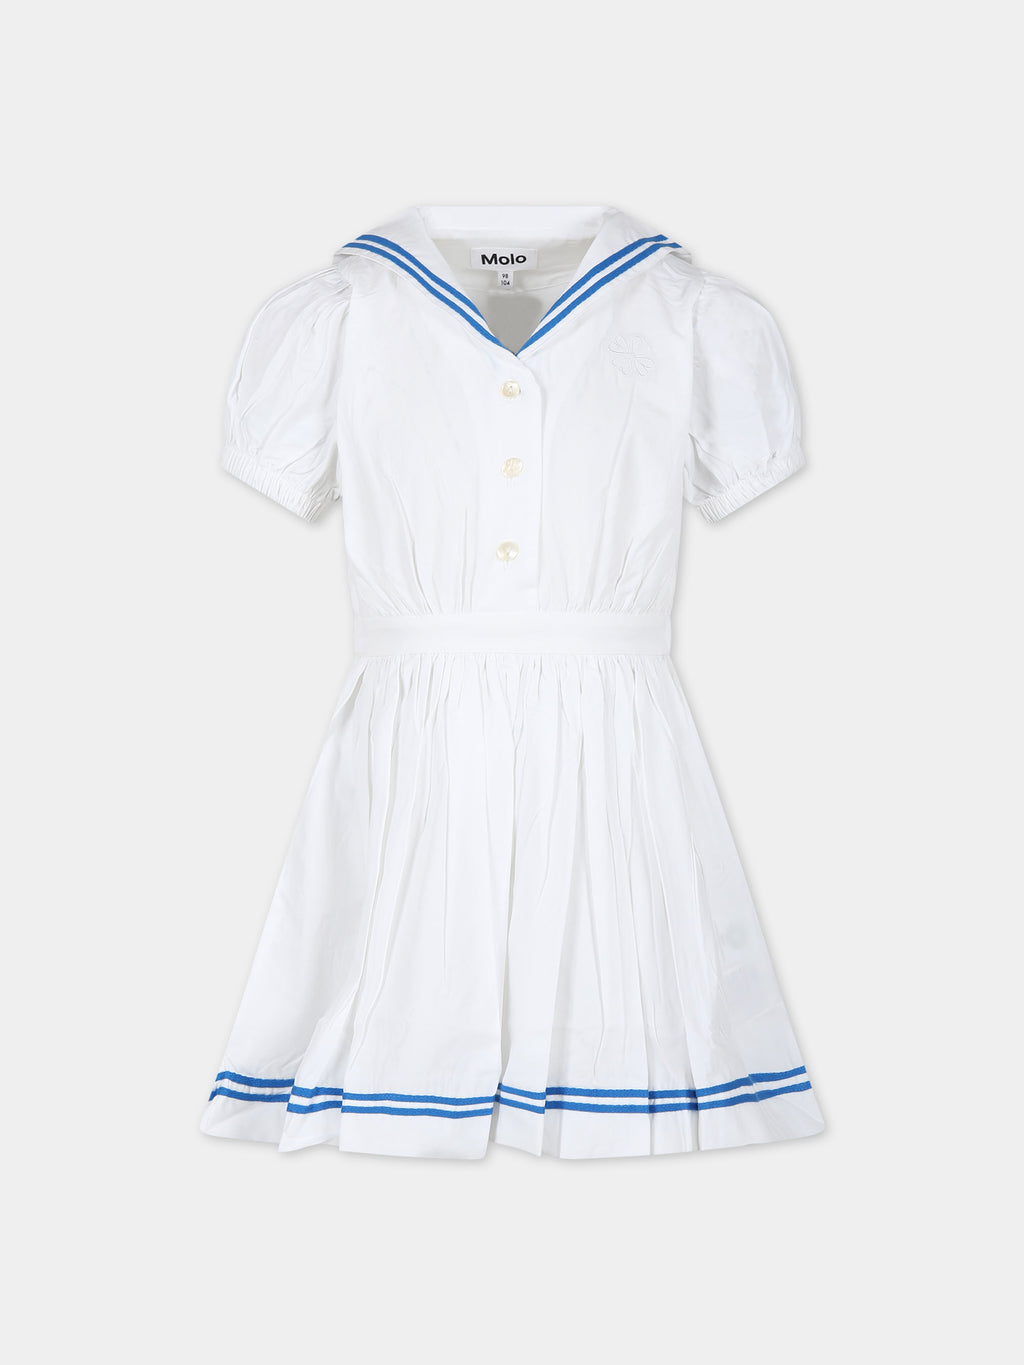 Robe blanche pour fille avec broderie